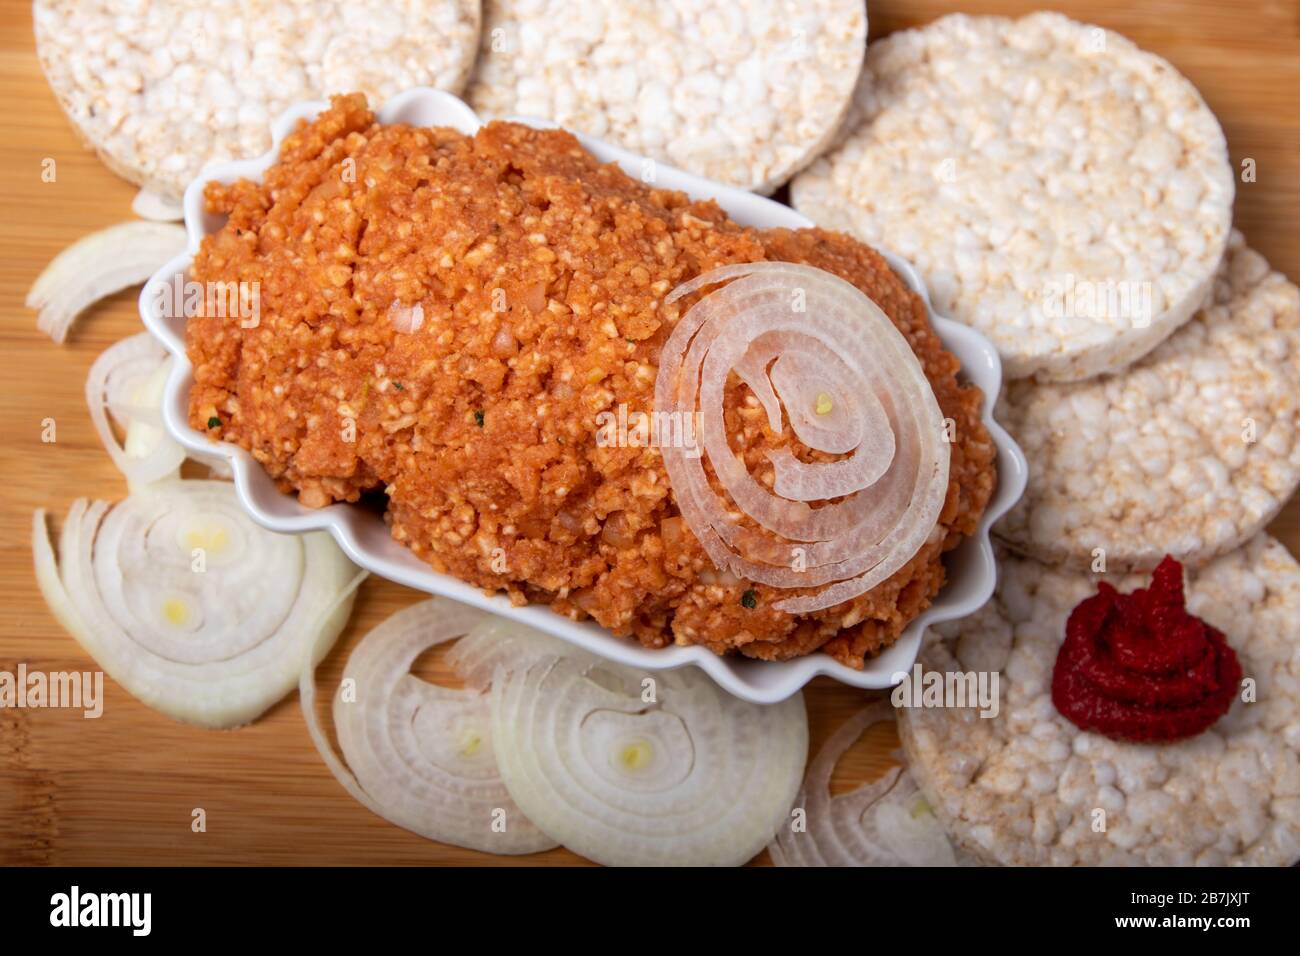 vegan spread with onions surrounded by rice cracker, onions and tomato paste, in a bowl on a wooden board, free text Stock Photo